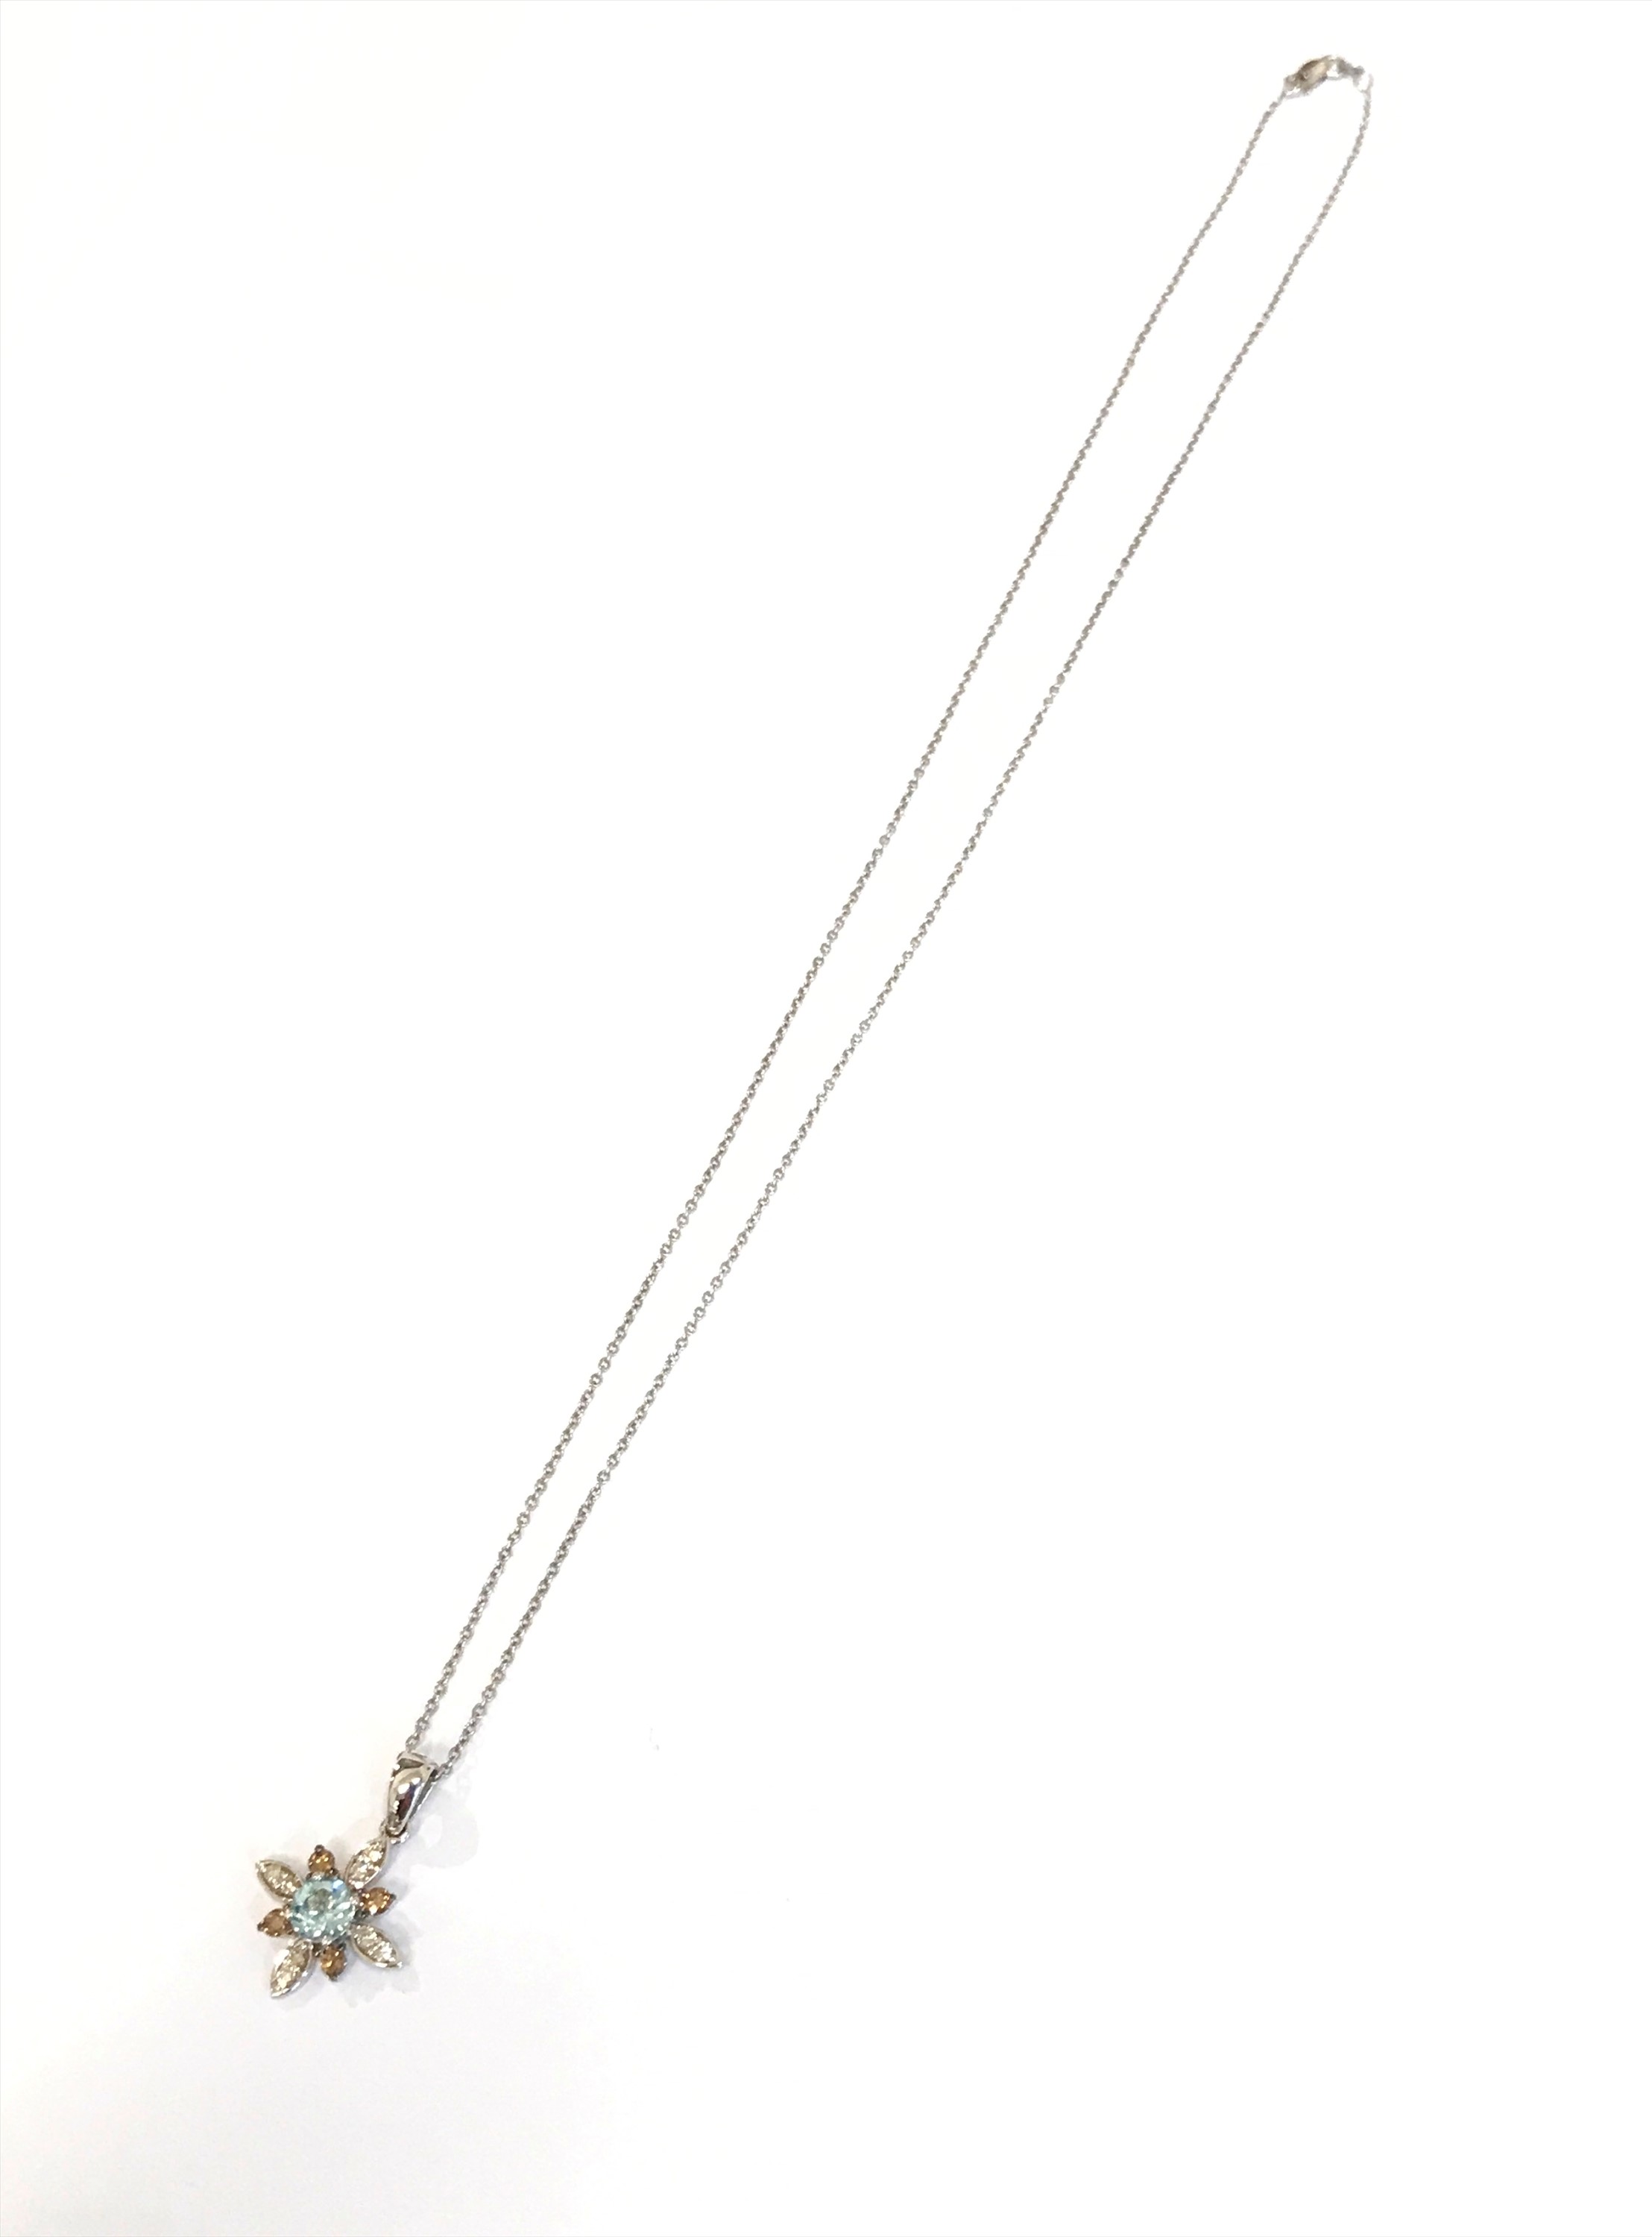 A 14ct gold diamond and aquamarine pendant by Le Vian. Cased - Image 2 of 3